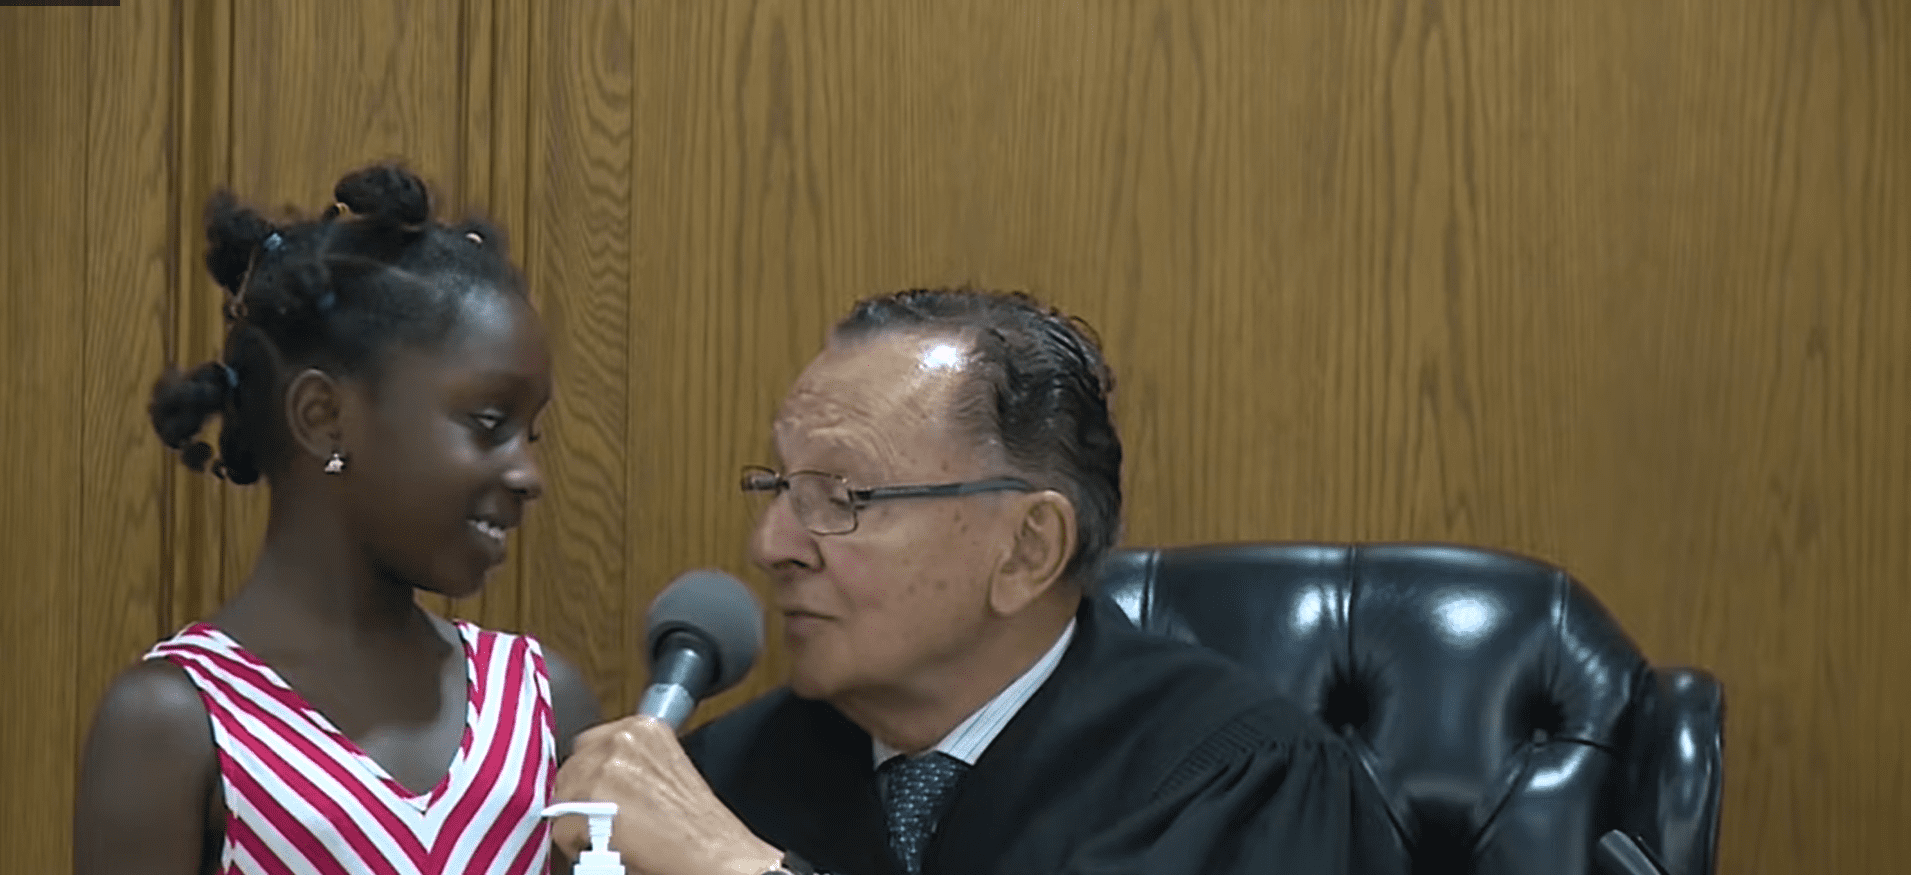 Janice and Judge Frank Caprio talking to one another. │Source: youtube.com/Caught in Providence